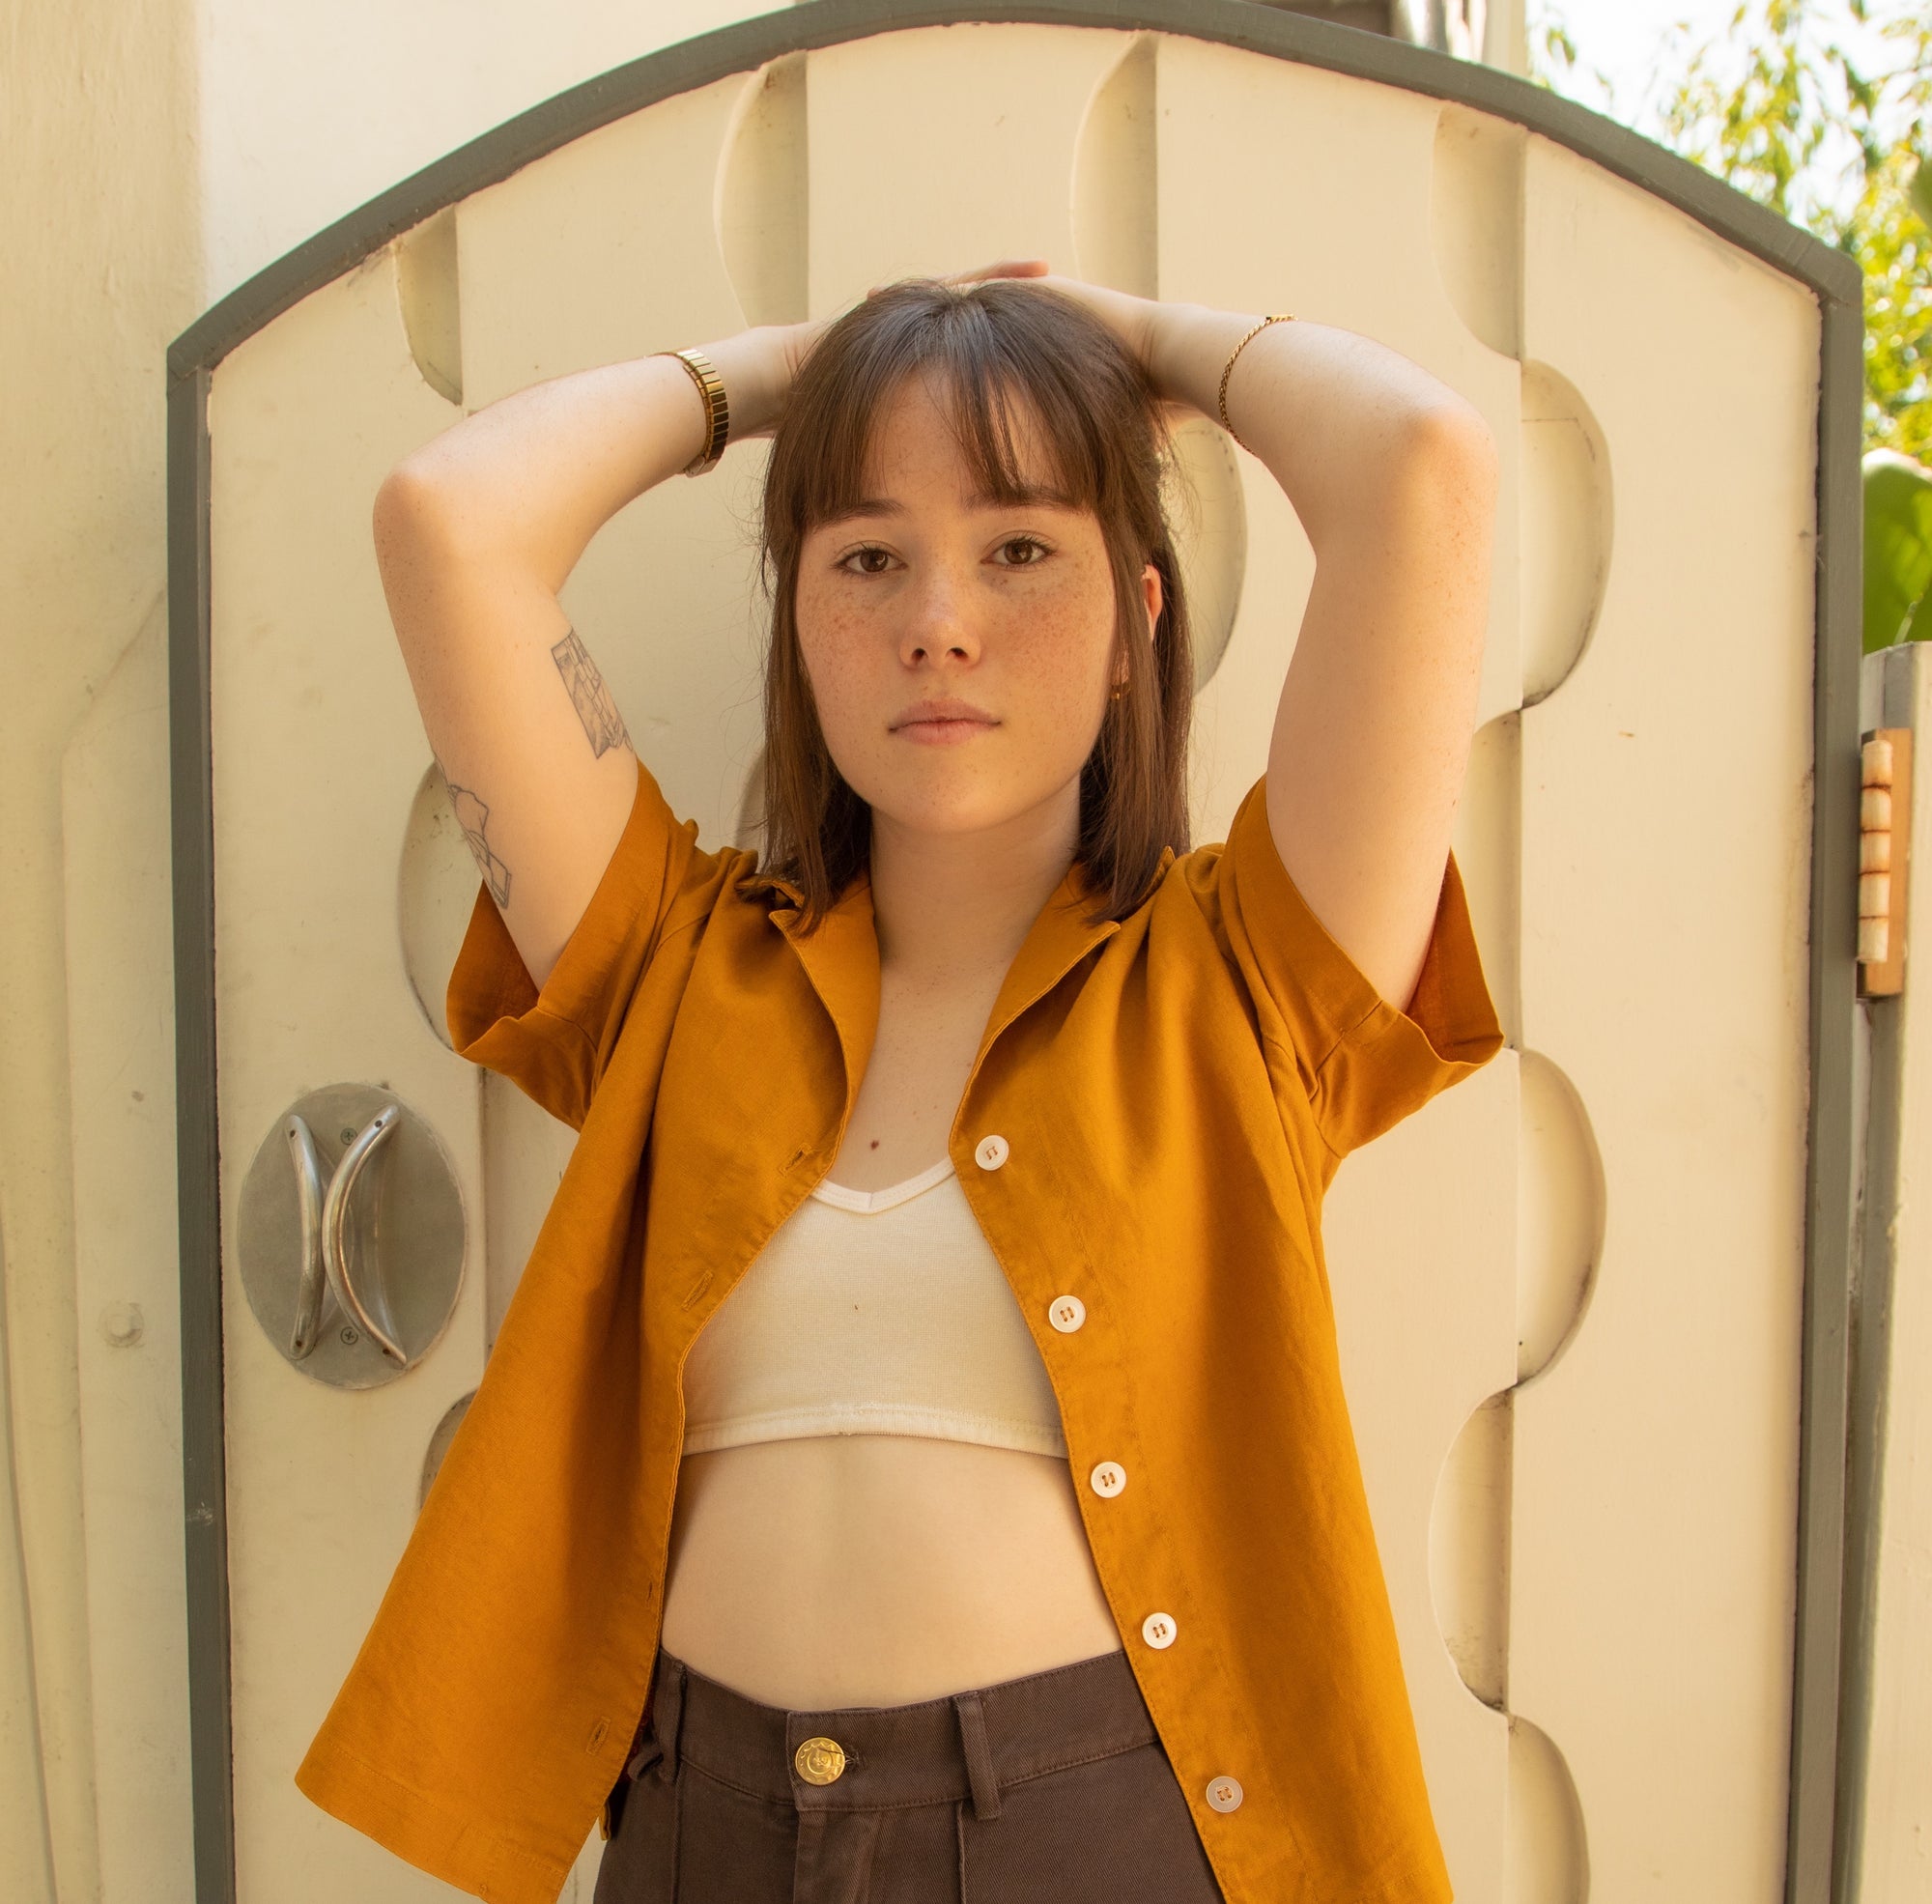 Hana wearing Pantry Button-Up in Spicy Mustard, Bralette in Vintage Off-White, and Petite Western Pants in Espresso Brown